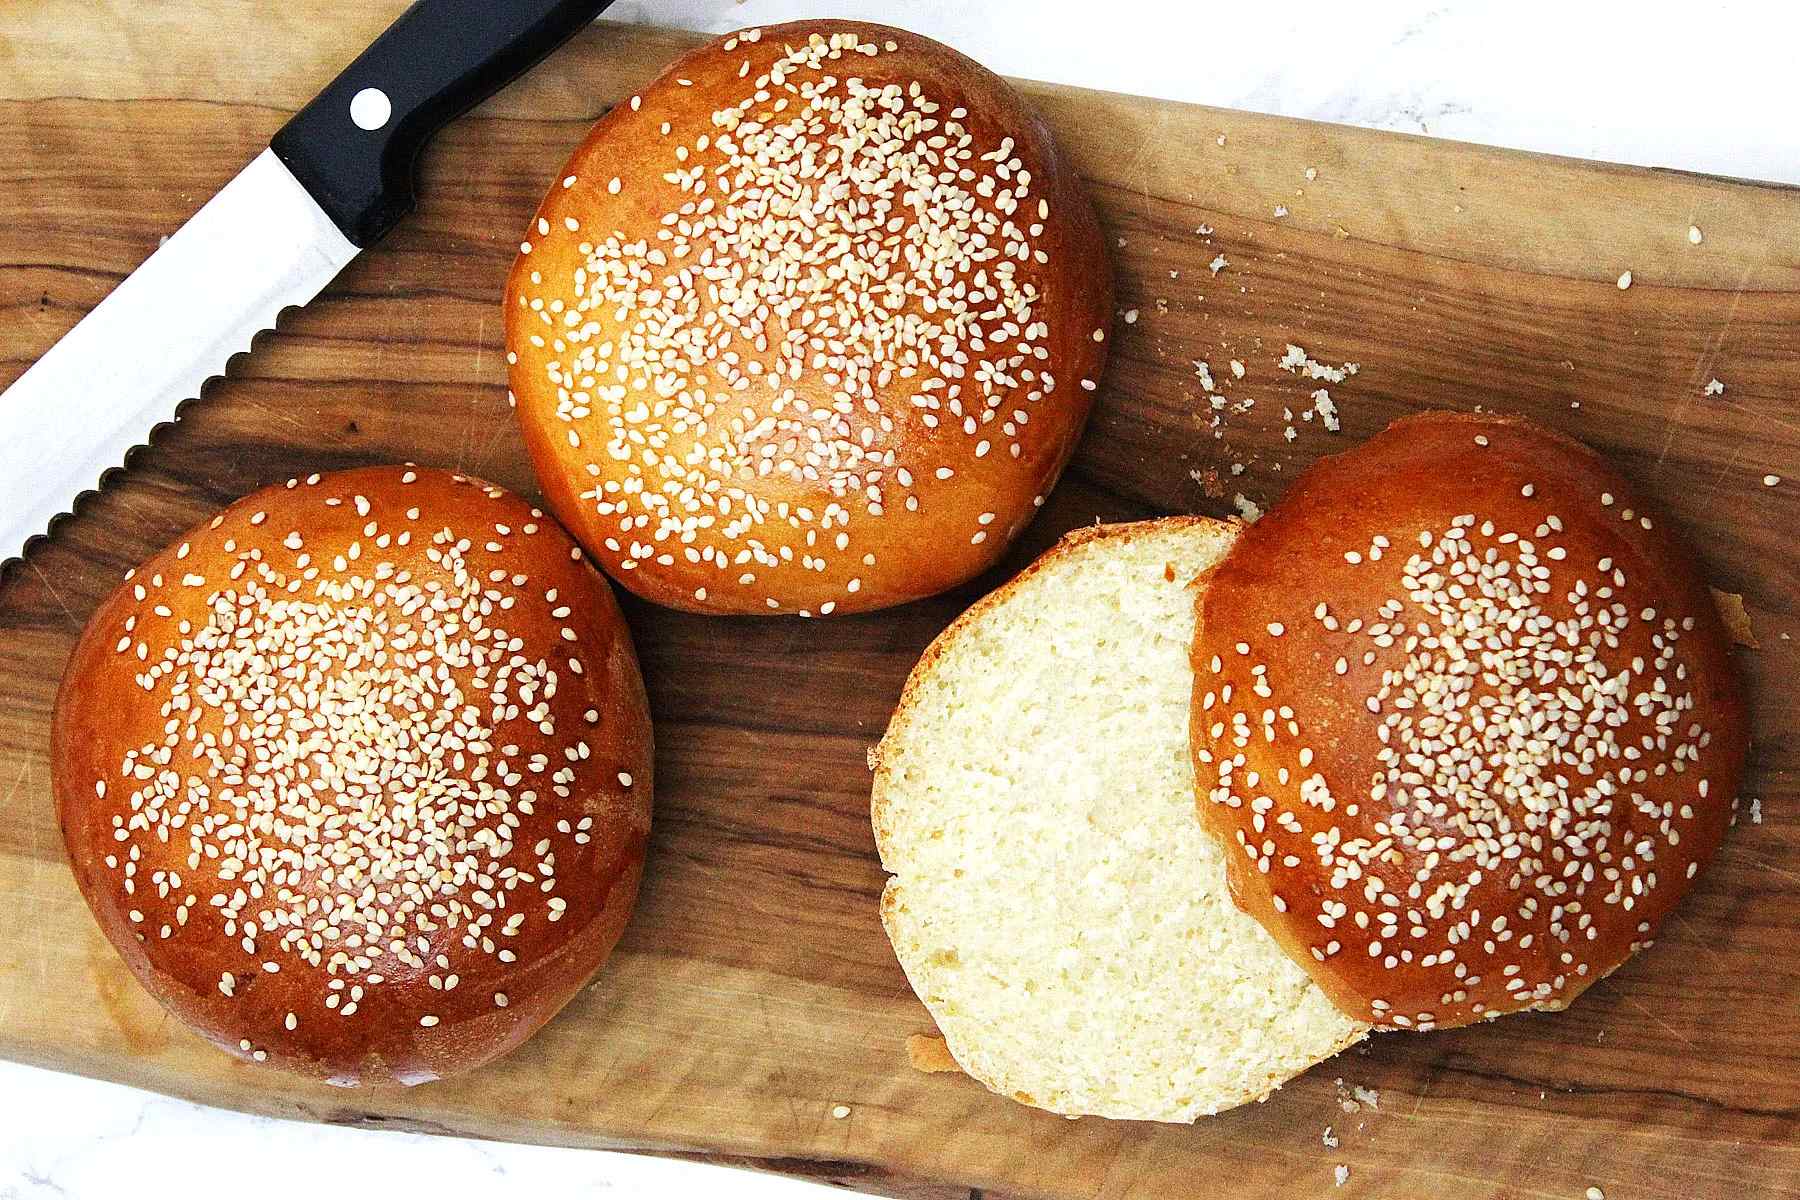 Why Are Sesame Seeds On Buns